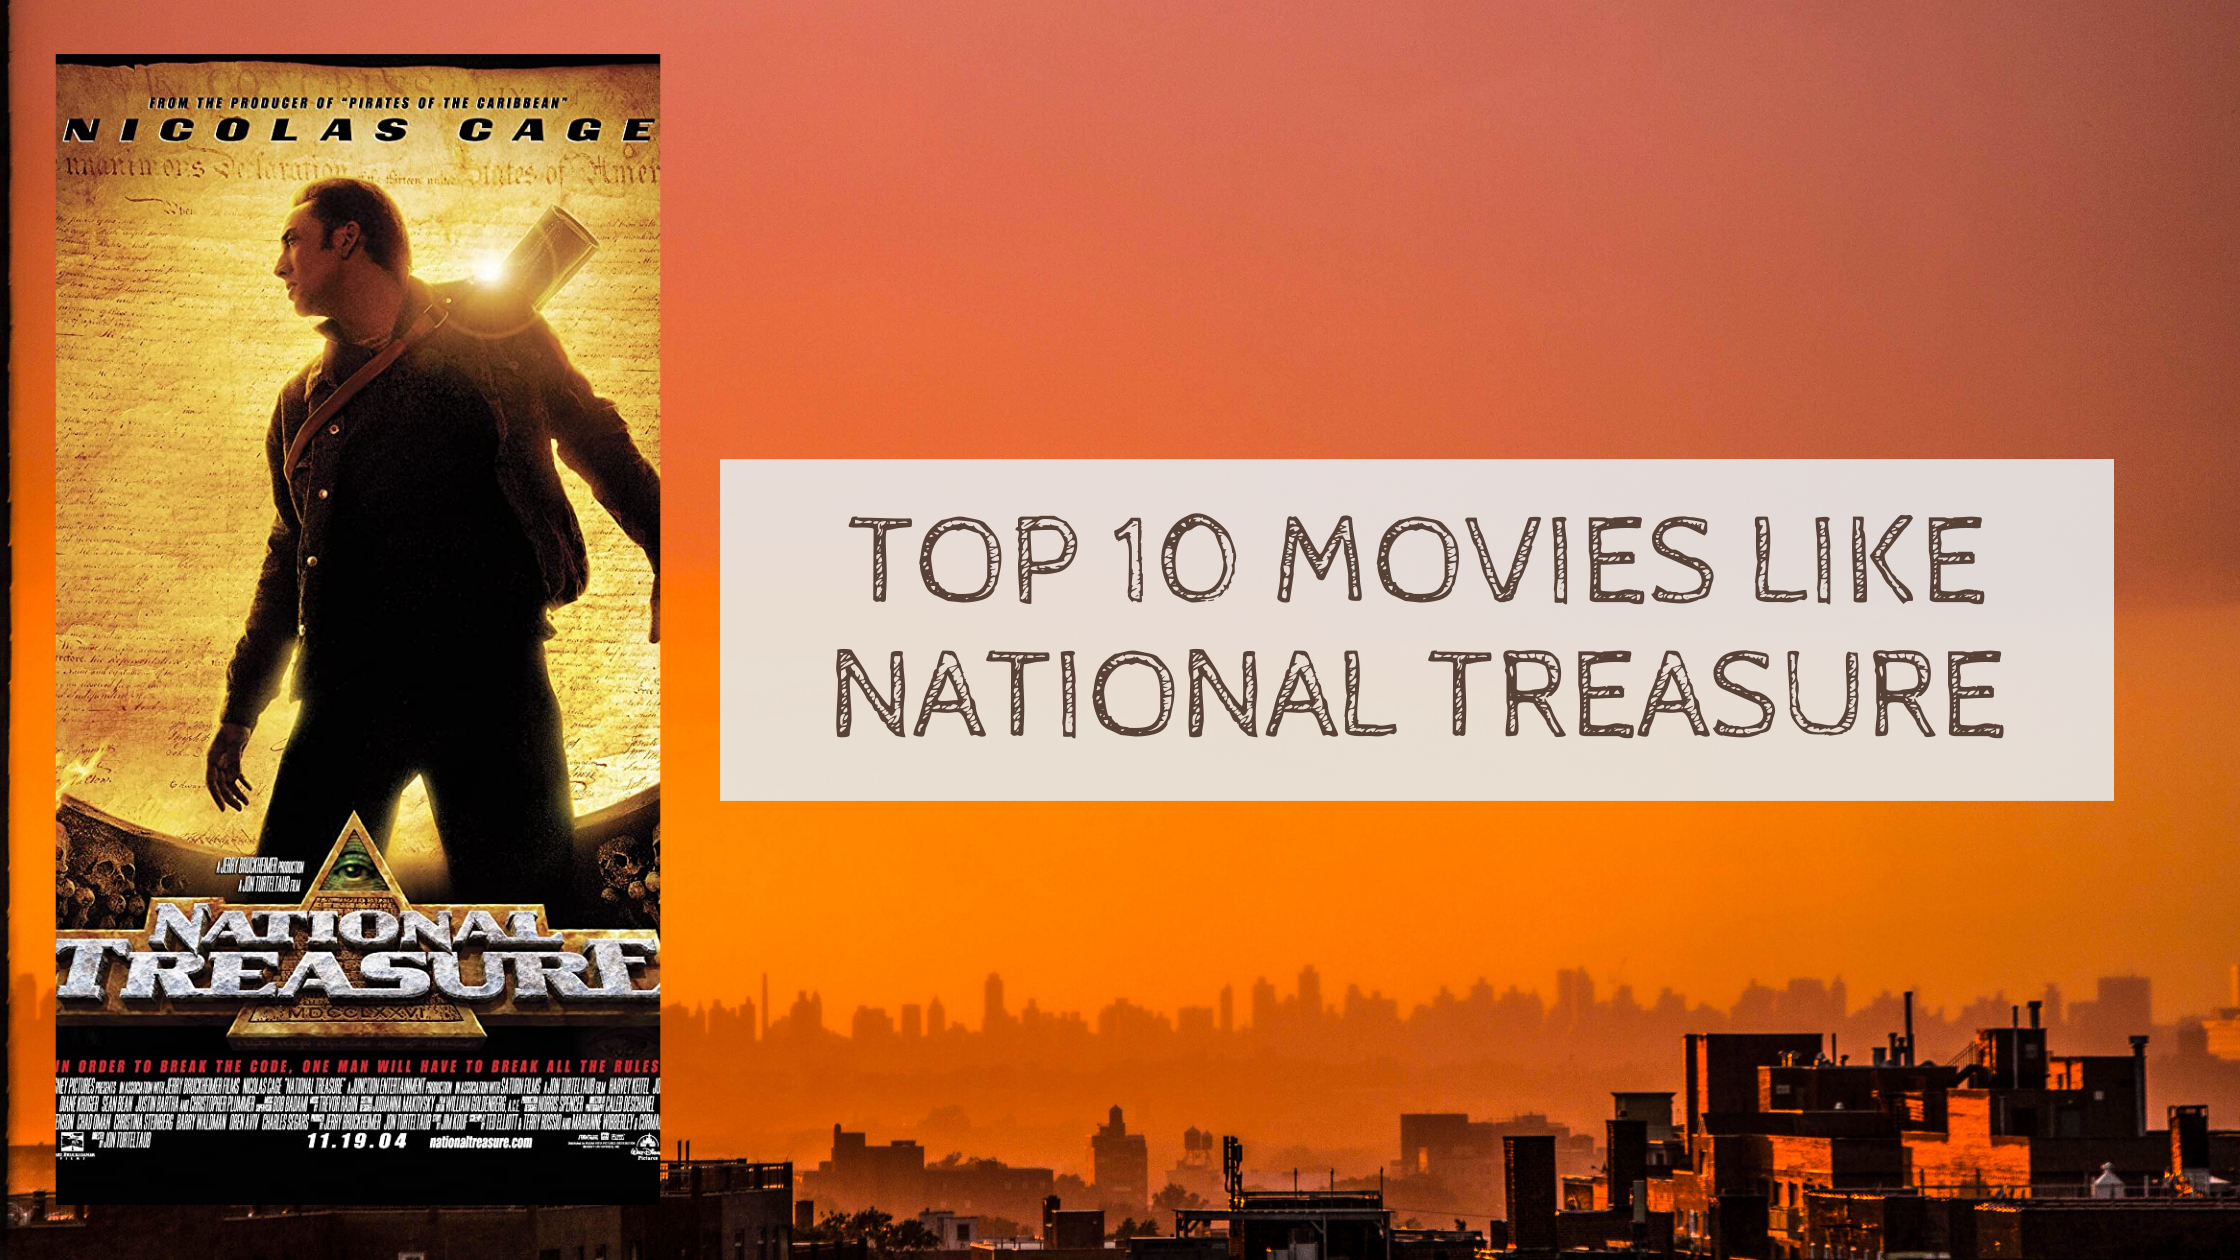 The Movie Like National Treasure That Adventure Fans Need To See